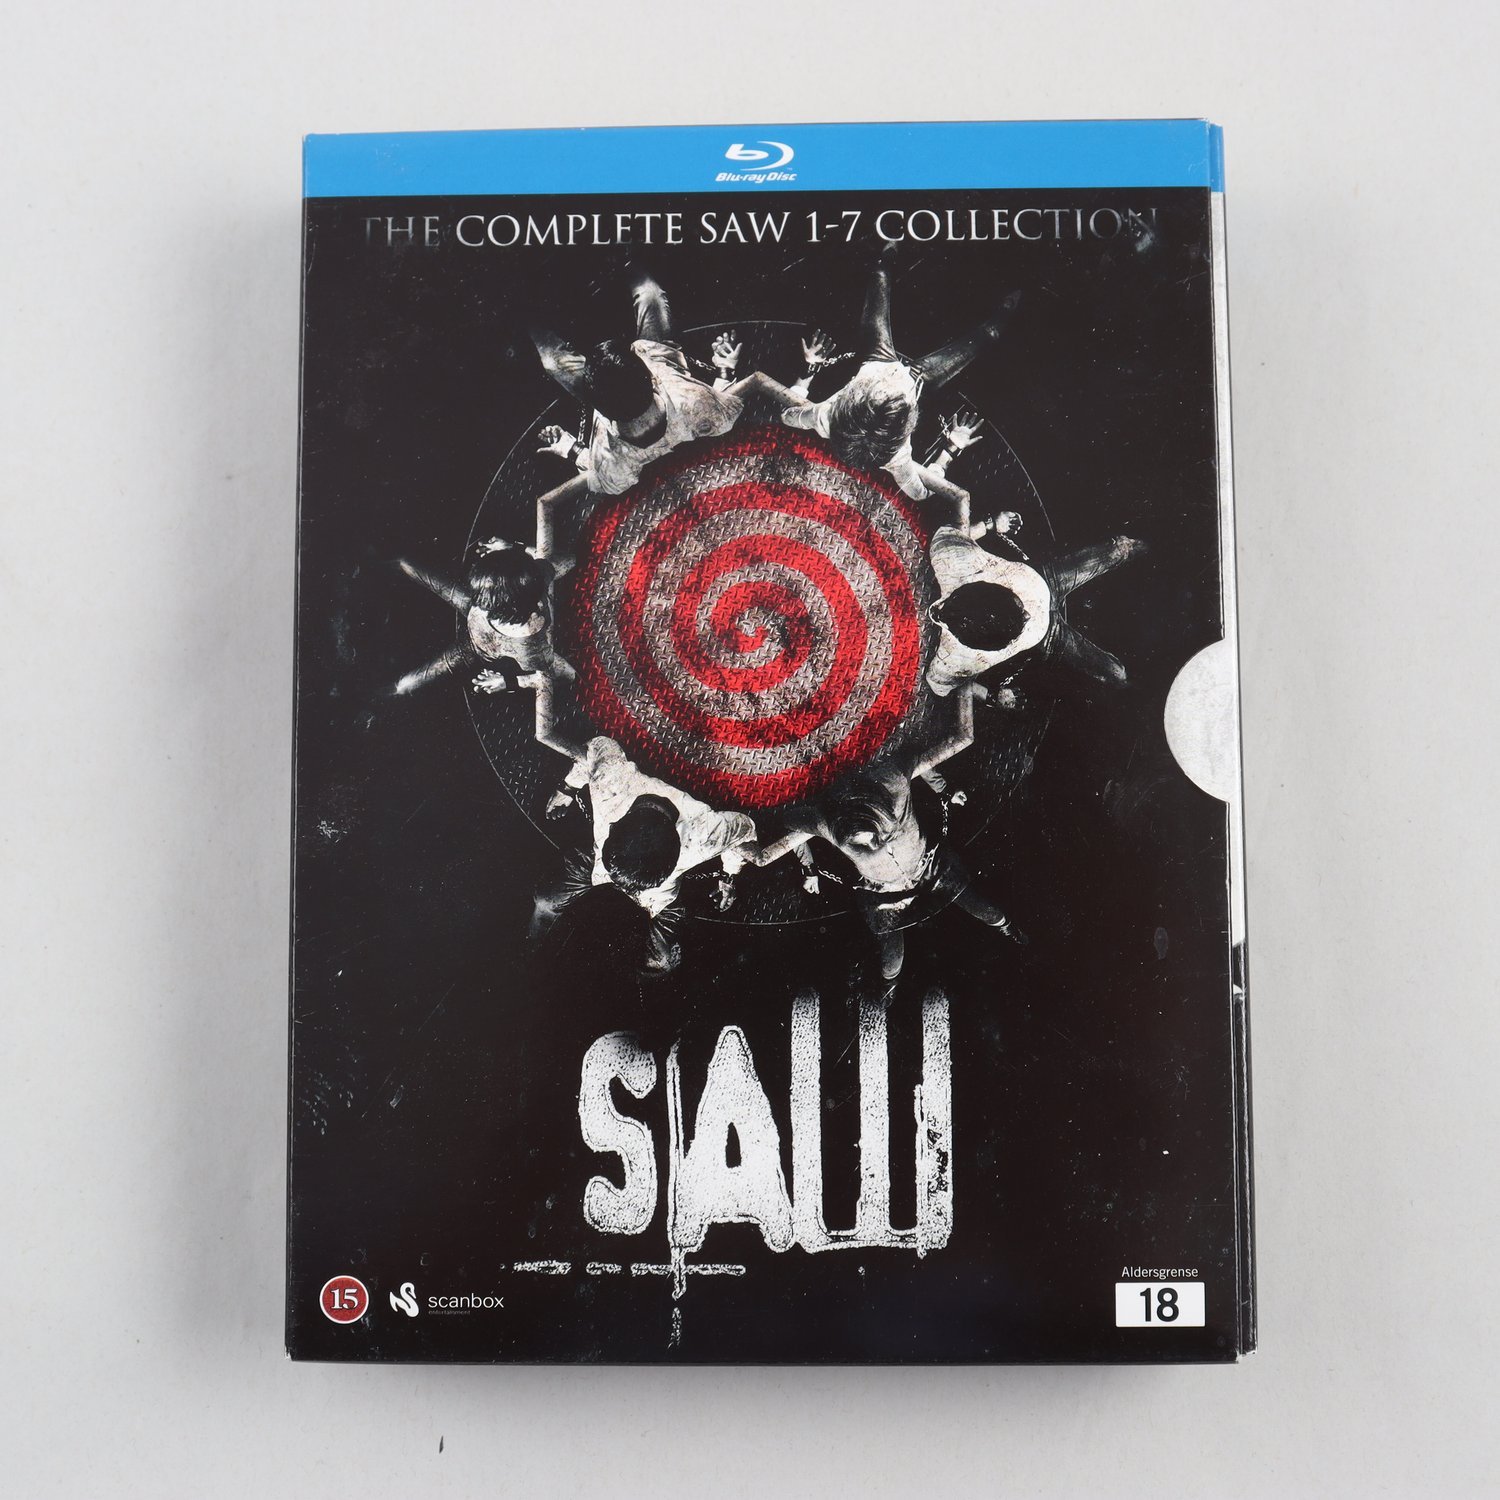 BLU-RAY Saw, The Complete Saw 1-7 Collection